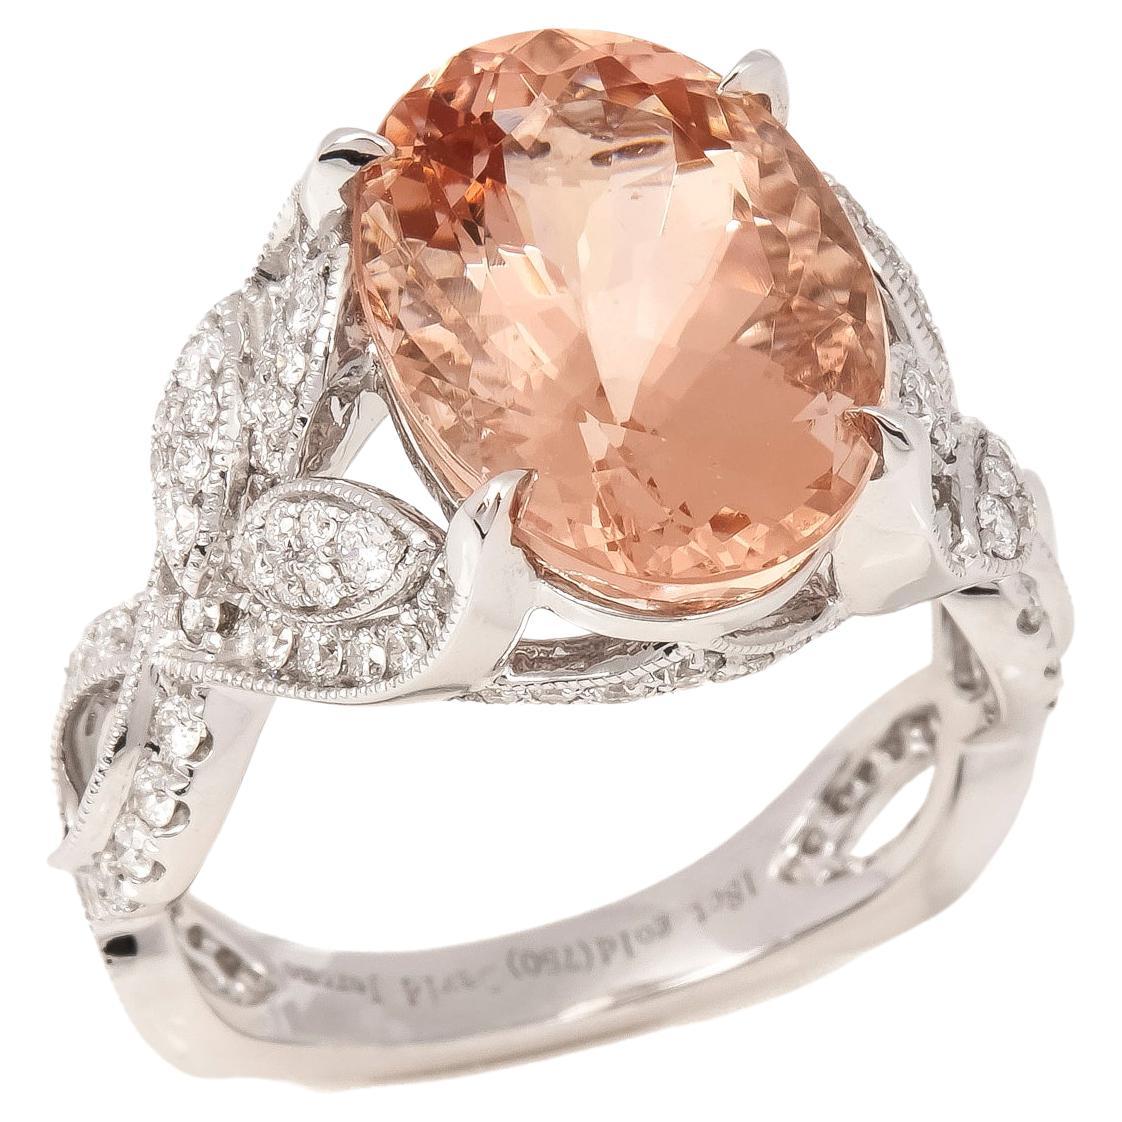 David Jerome Certified 6.24ct Oval Cut Morganite and Diamond Ring For Sale